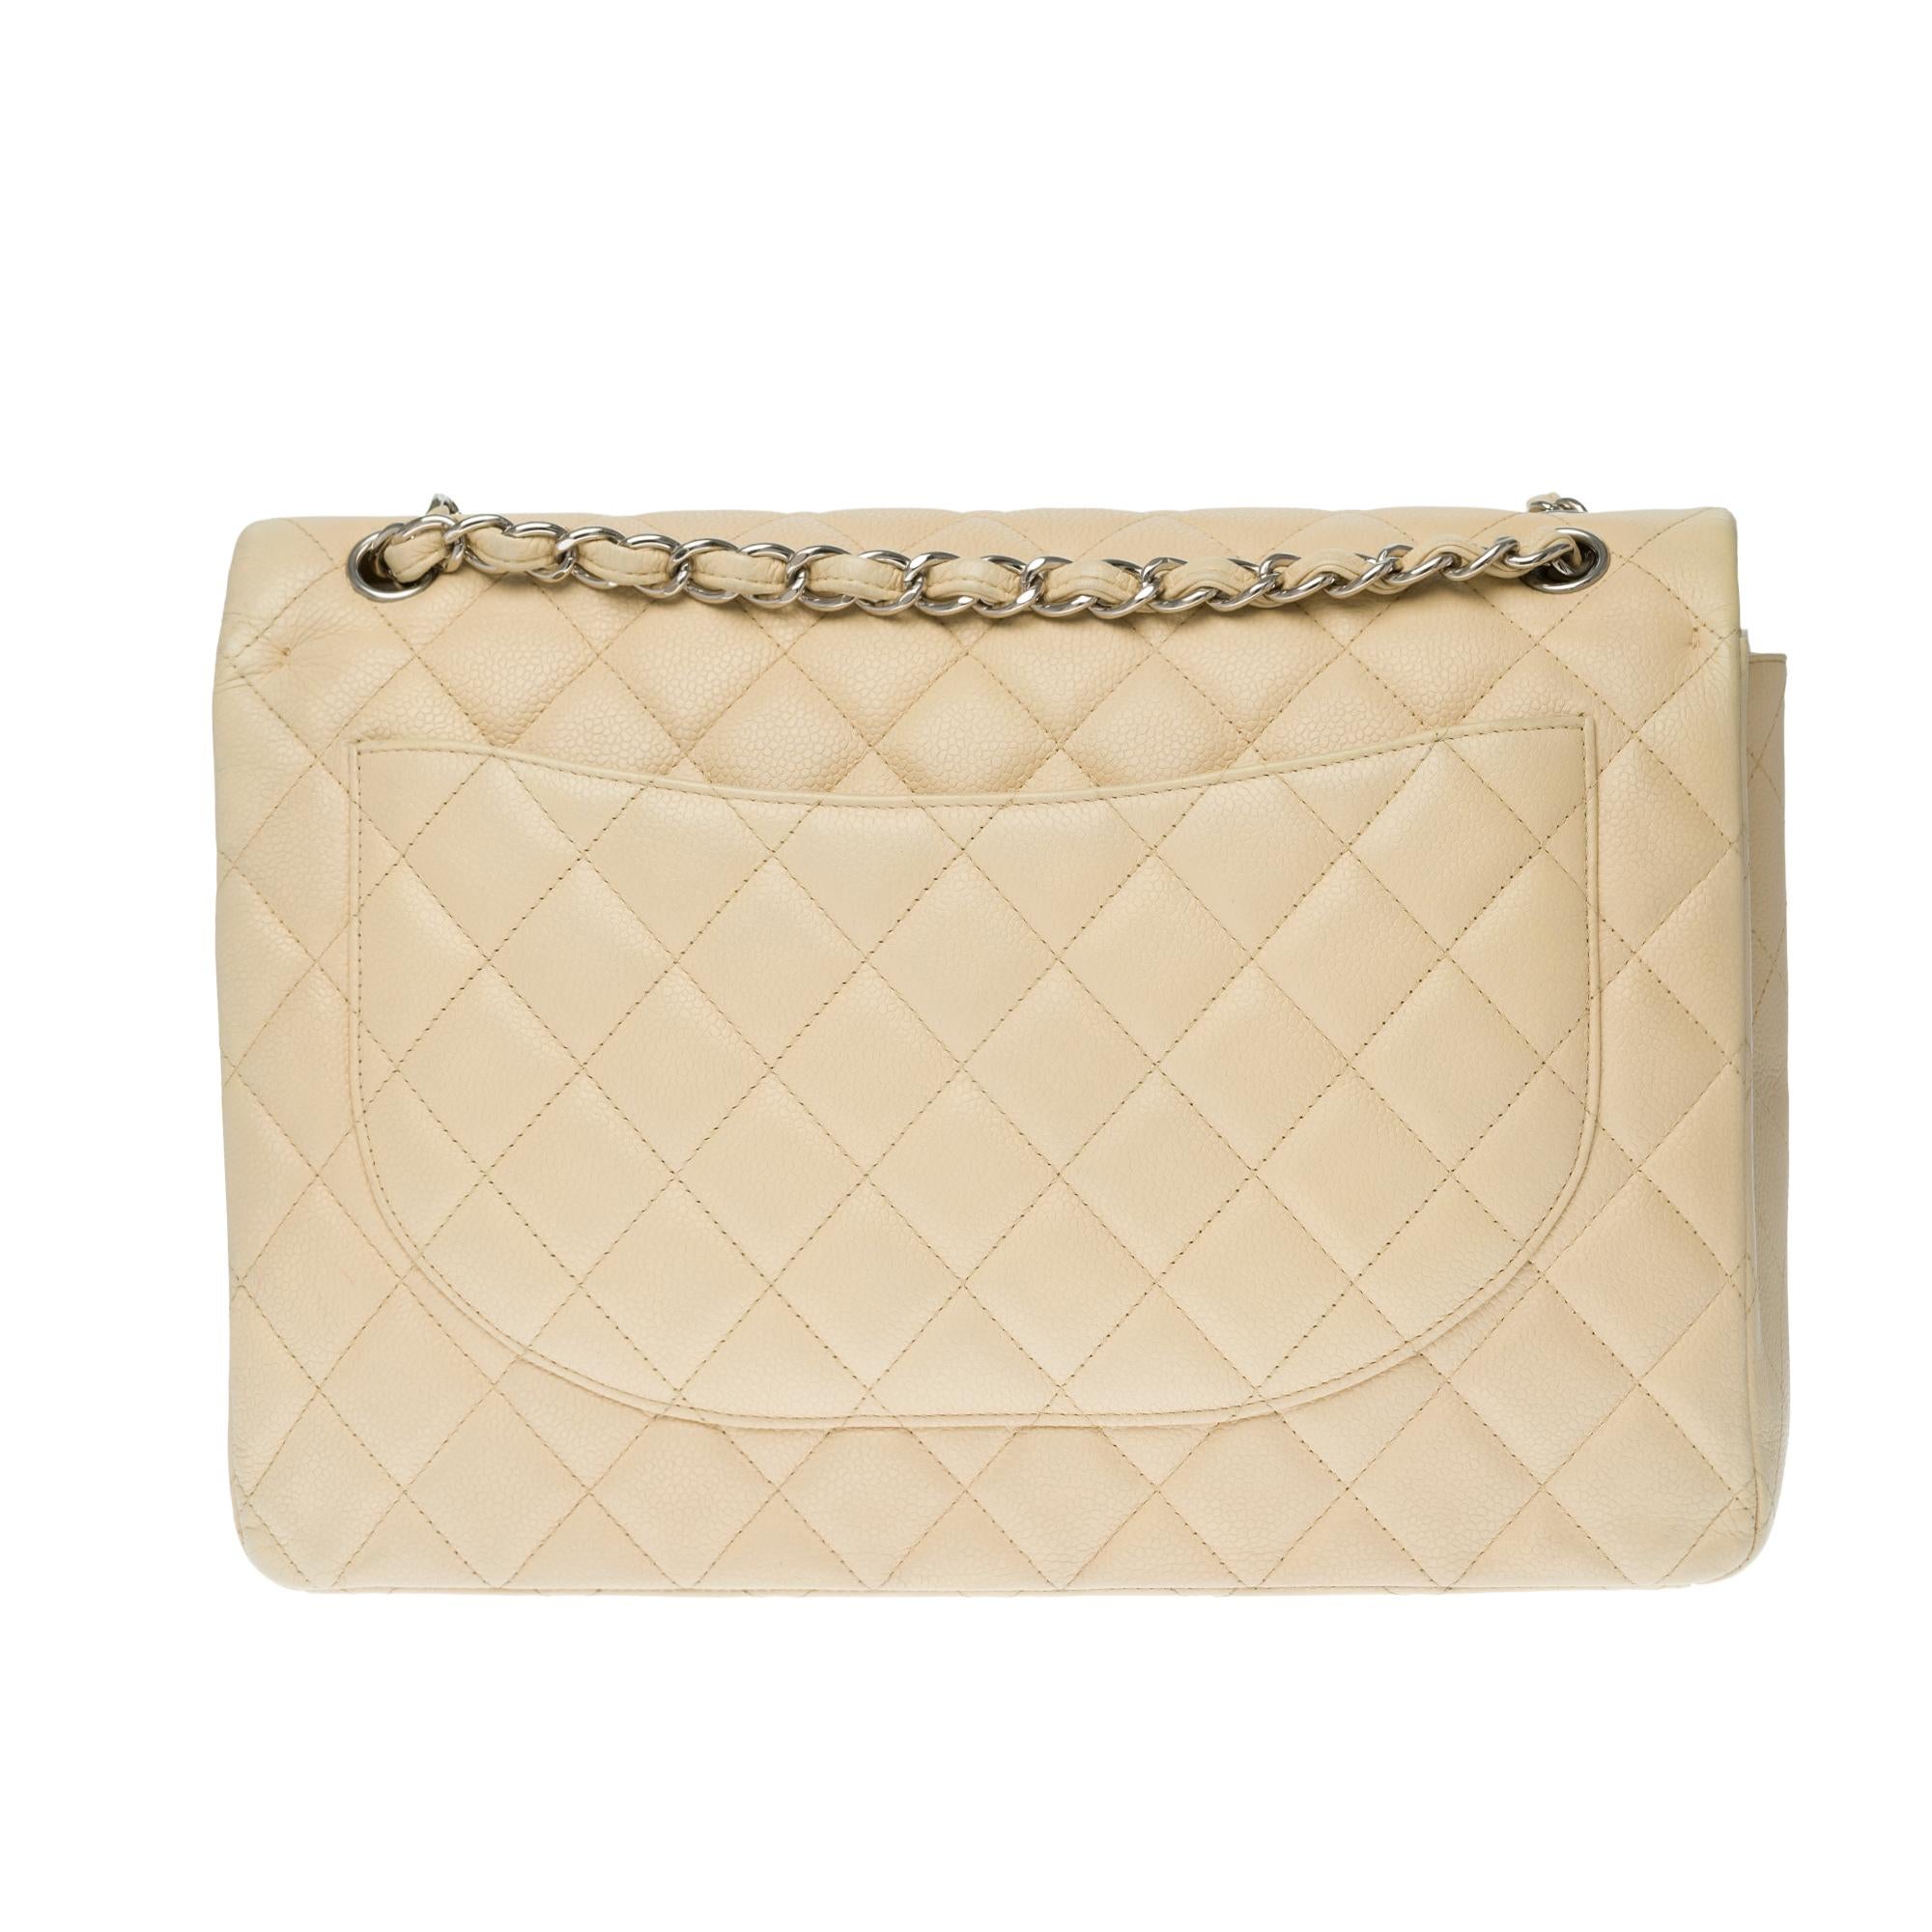 The Majestic shoulder bag Chanel Timeless Maxi jumbo in beige quilted grained leather, silver metal hardware, silver metal chain handle intertwined with beige leather allowing a hand or shoulder or shoulder strap.

Silver metal logo closure on